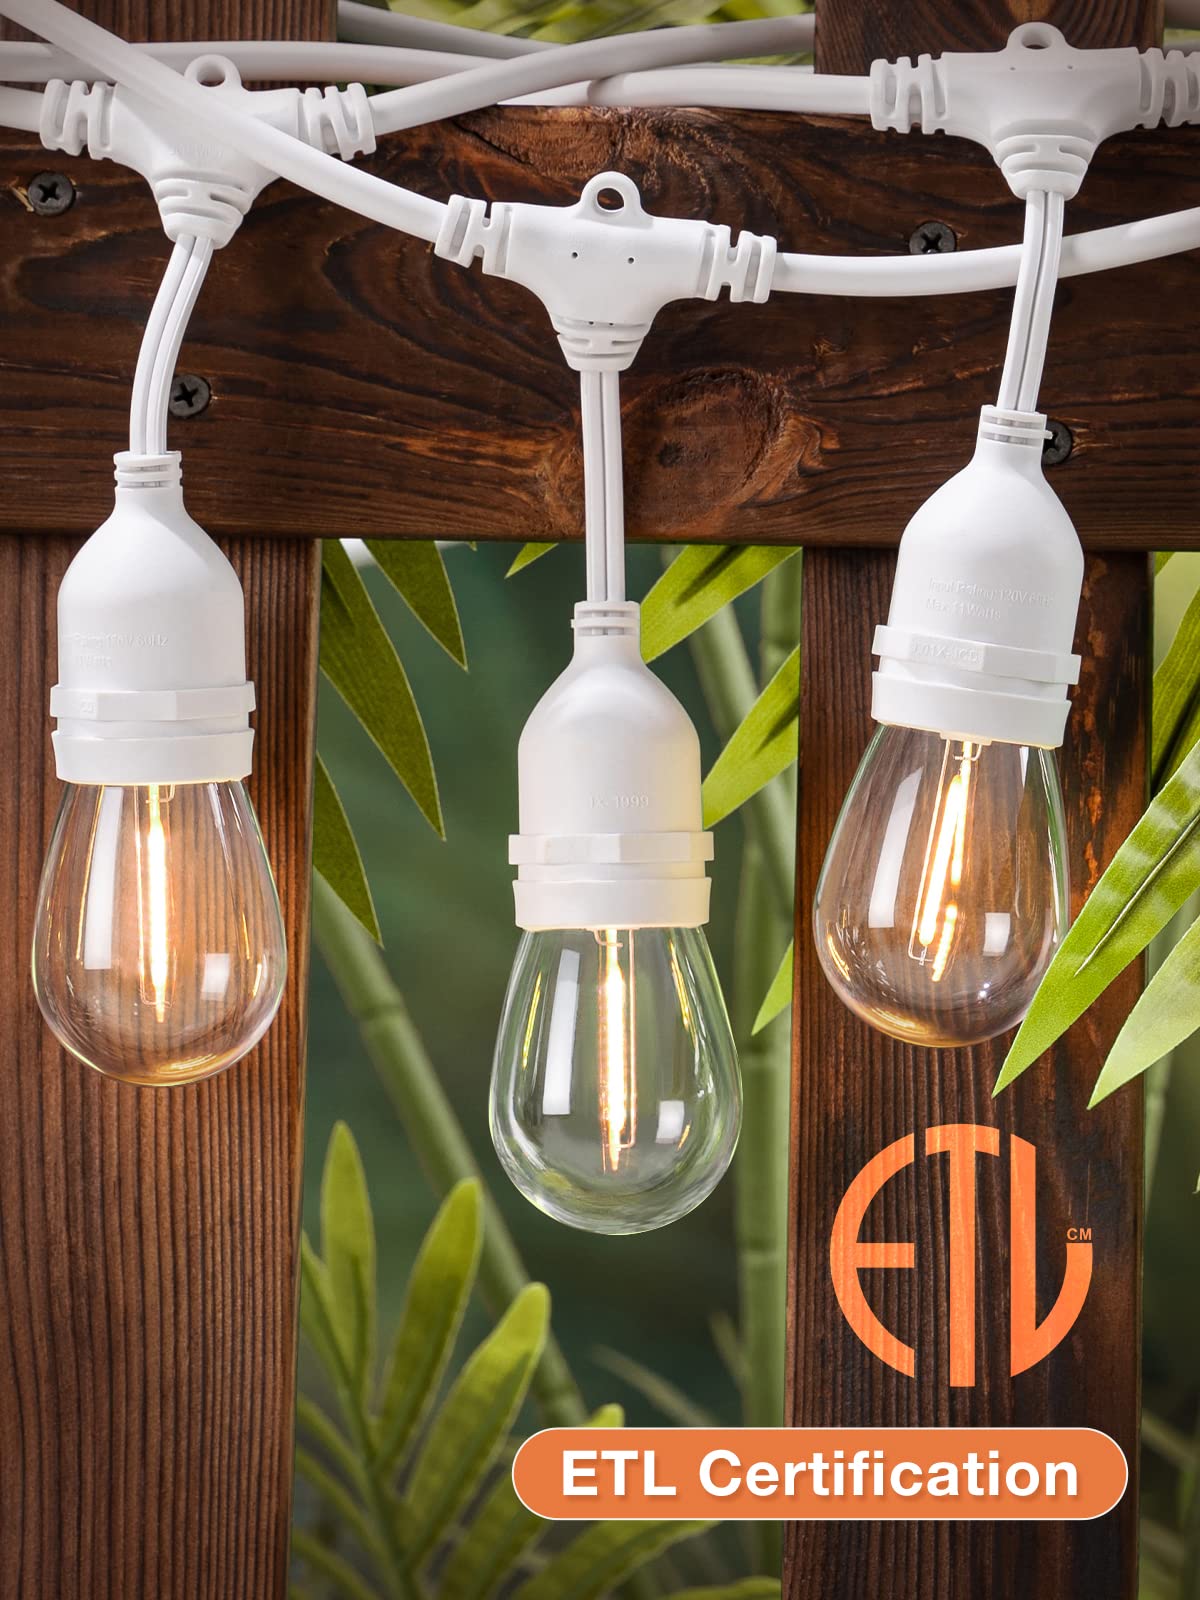 LED Outdoor String Lights 48FT with 2W Dimmable Edison Vintage Shatterproof  Bulbs and Commercial Grade Weatherproof Strand ETL Listed Heavy-Duty  Decorative Cafe, Patio, Market Light White